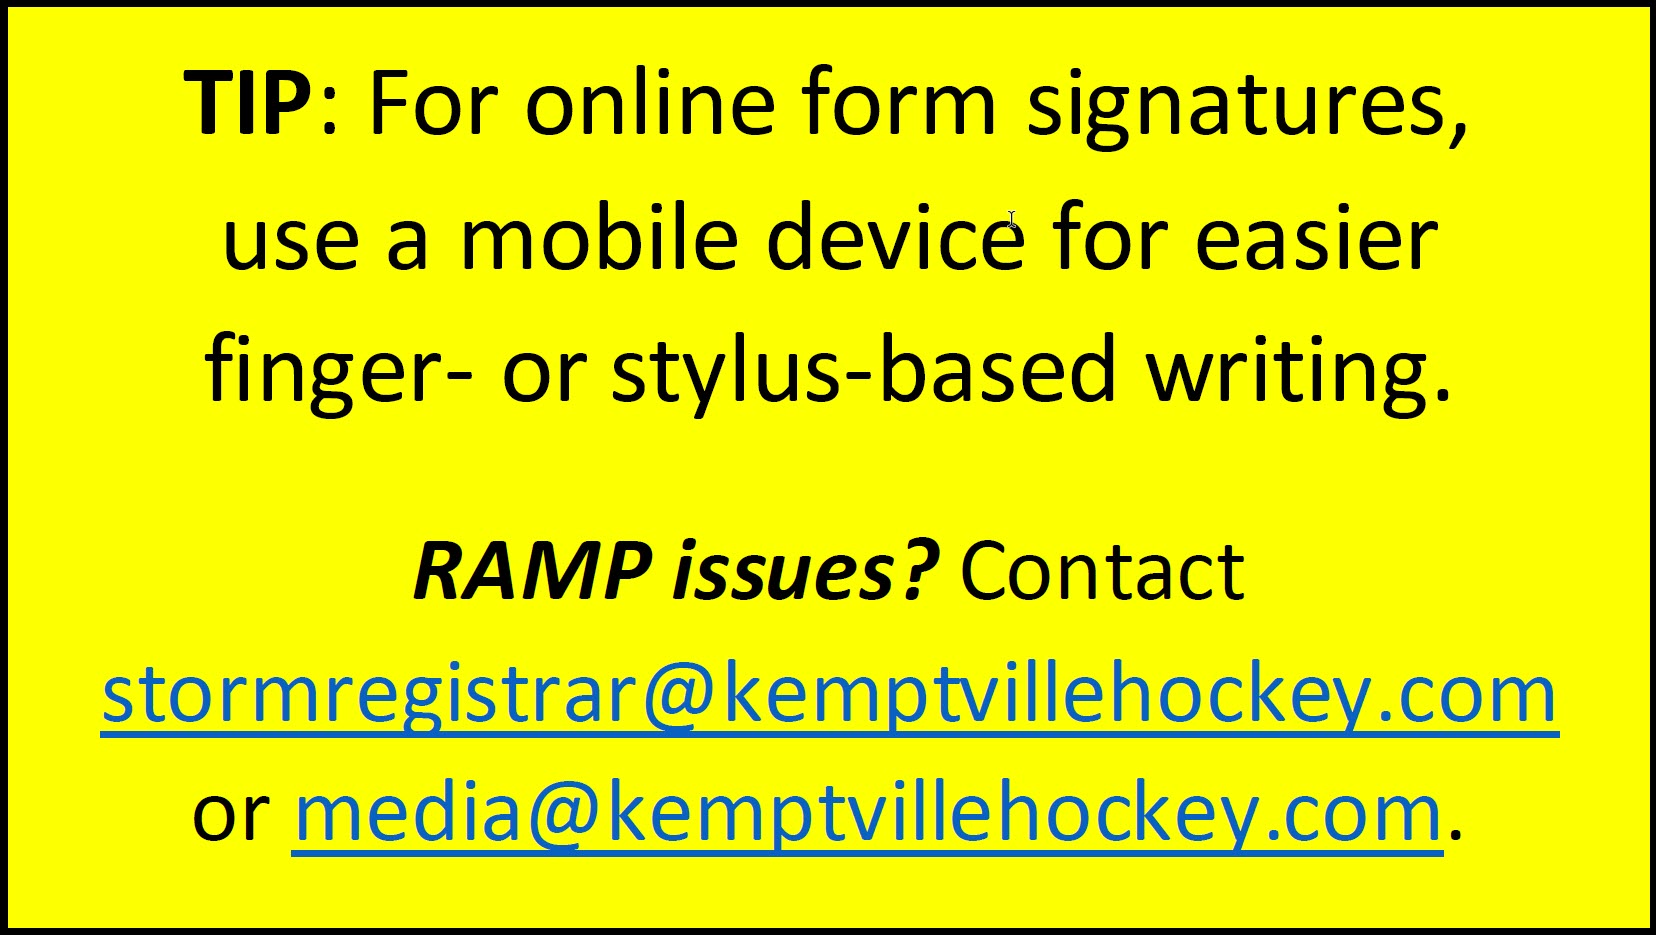 Text Box: TIP: For online form signatures, use a mobile device for easier finger- or stylus-based writing.RAMP issues? Contact stormregistrar@kemptvillehockey.com or media@kemptvillehockey.com. 